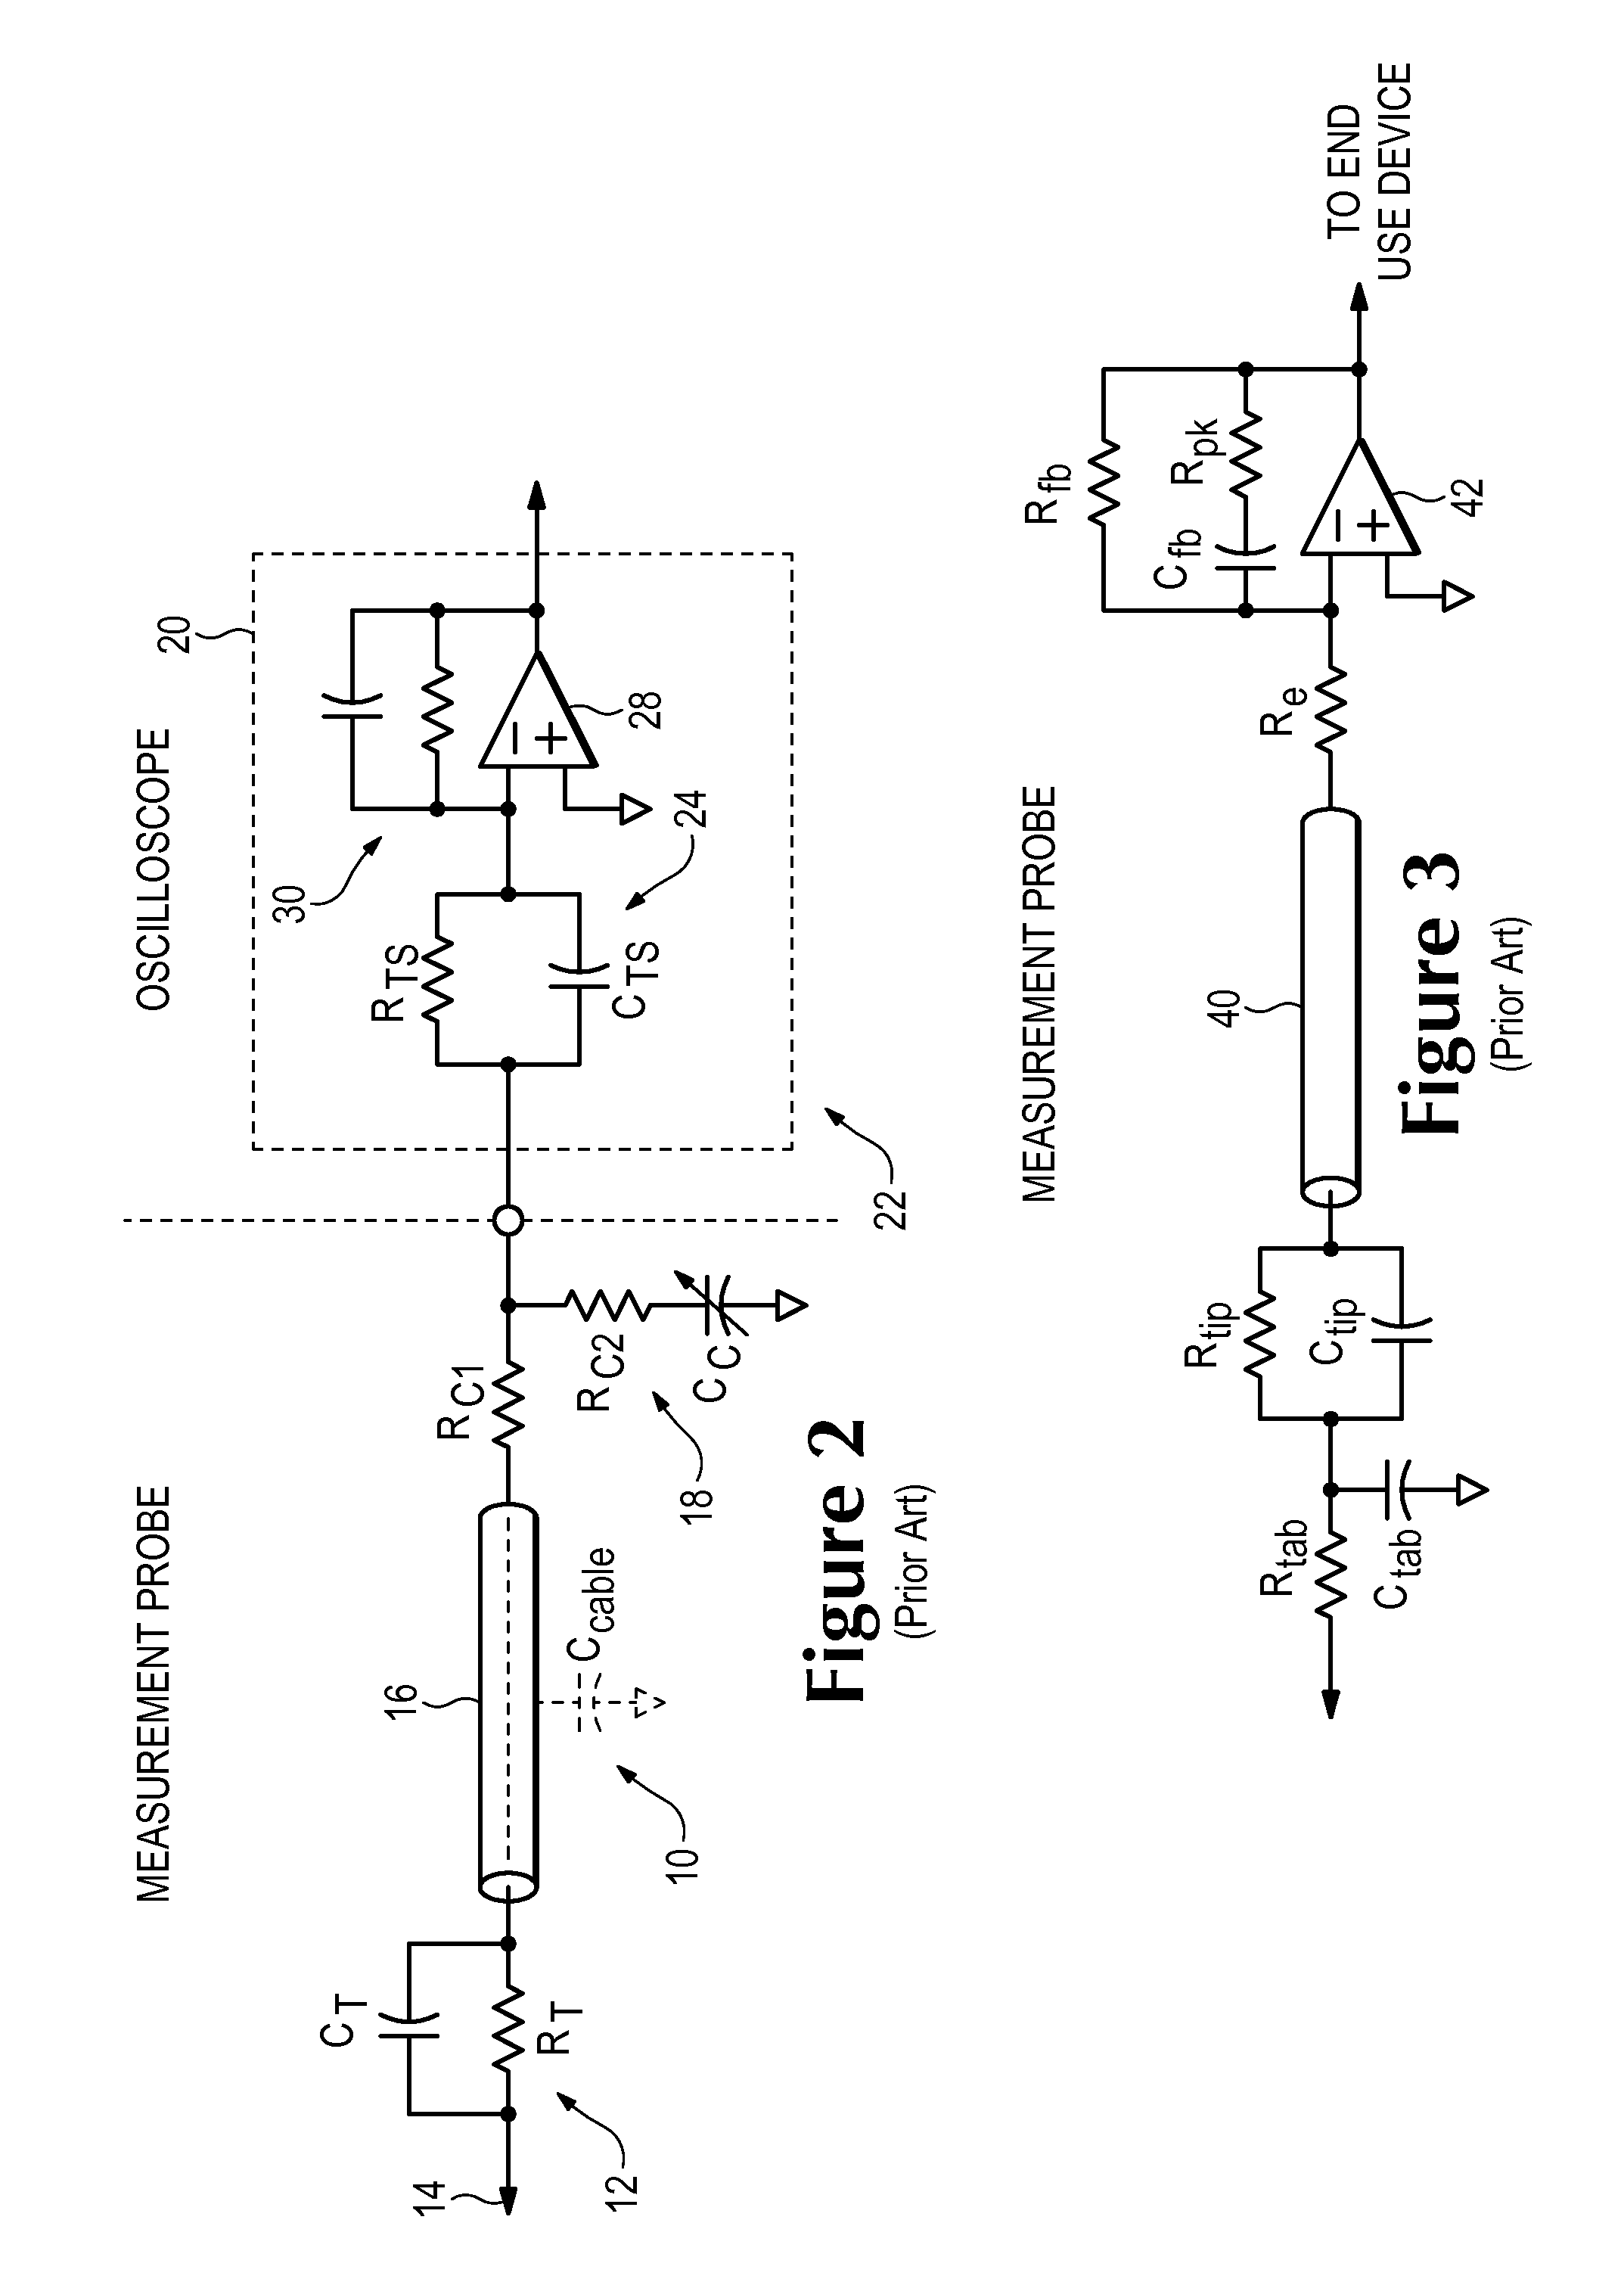 Signal Acquisition System Having Probe Cable Termination in a Signal Processing Instrument